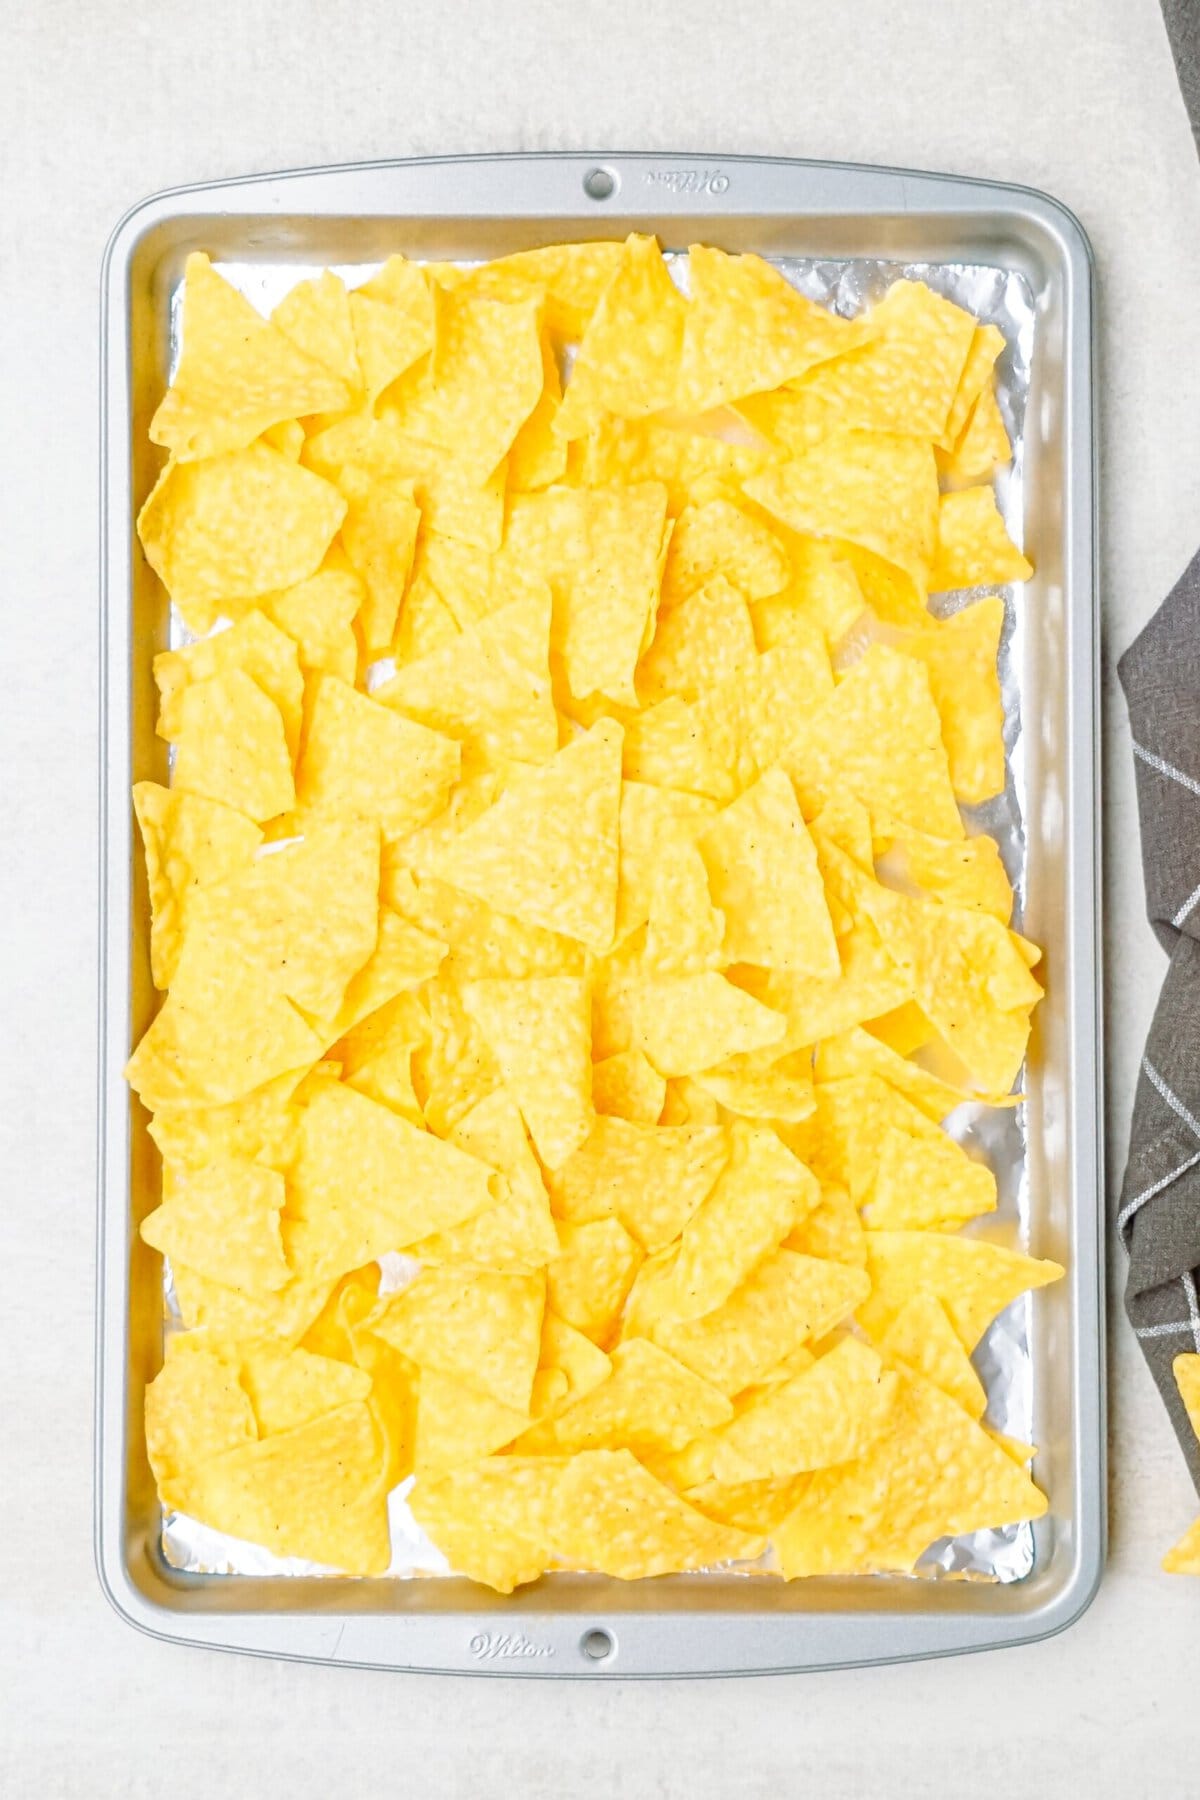 A baking sheet filled with a single layer of uncooked yellow tortilla chips.